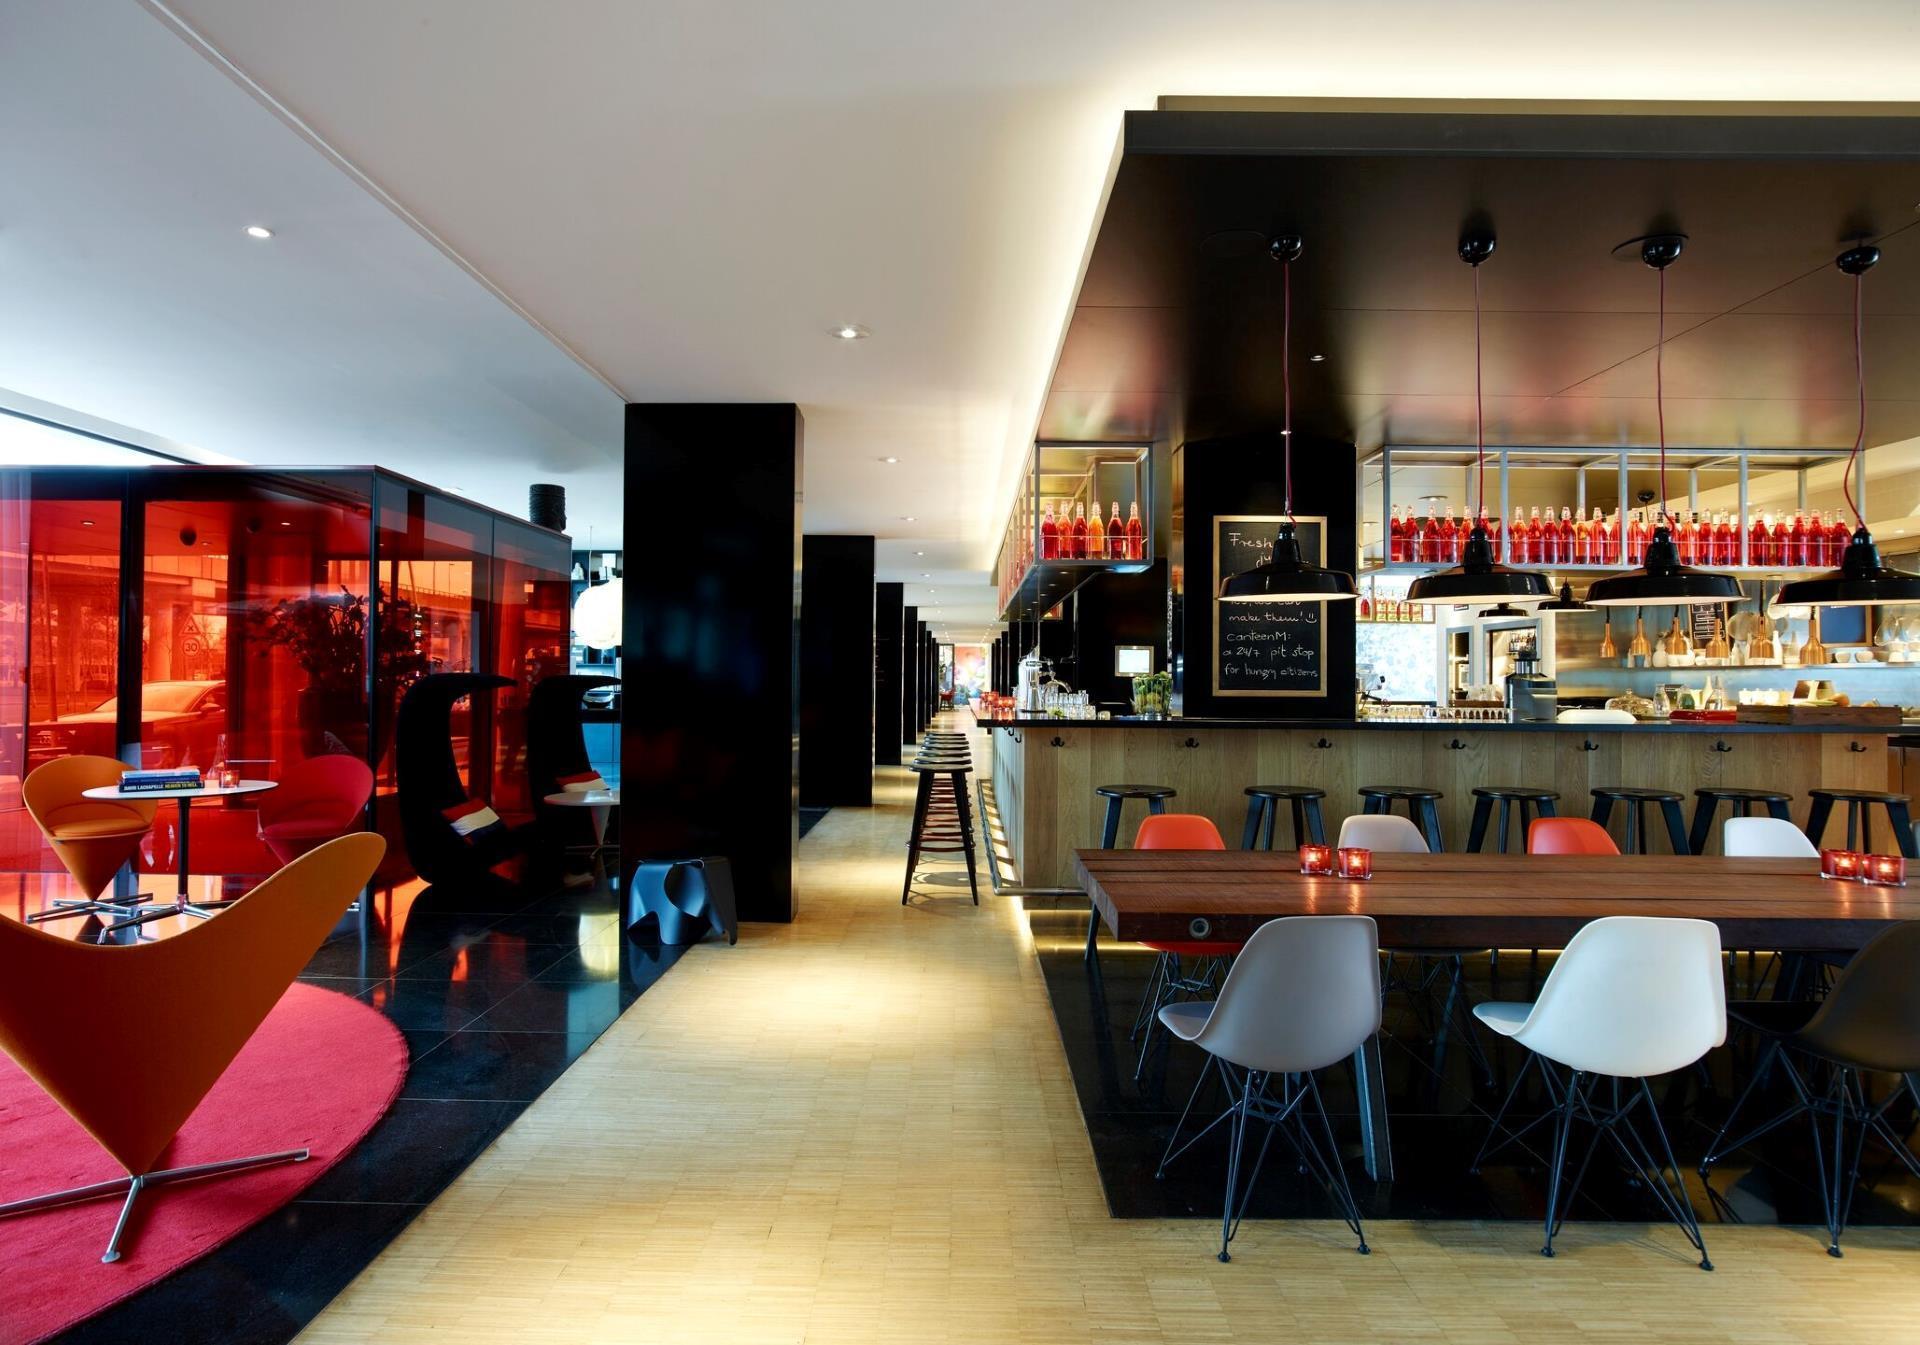 citizenM Schiphol Airport in Amsterdam, NL